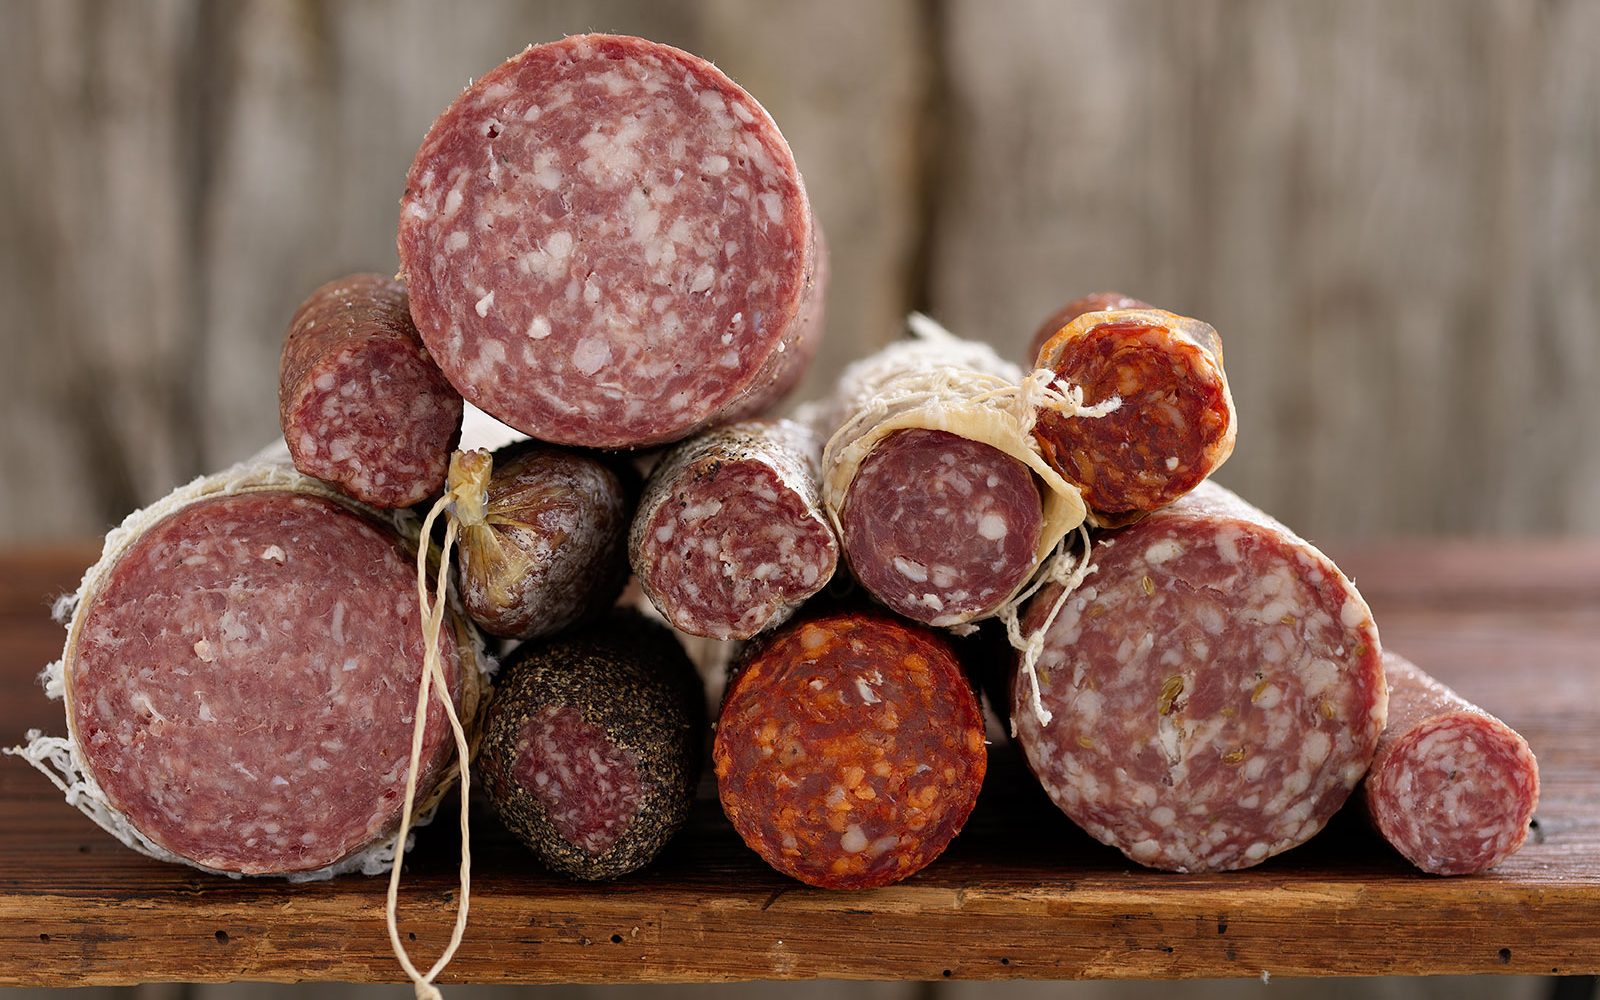 volpi-foods-different-types-of-salami-he